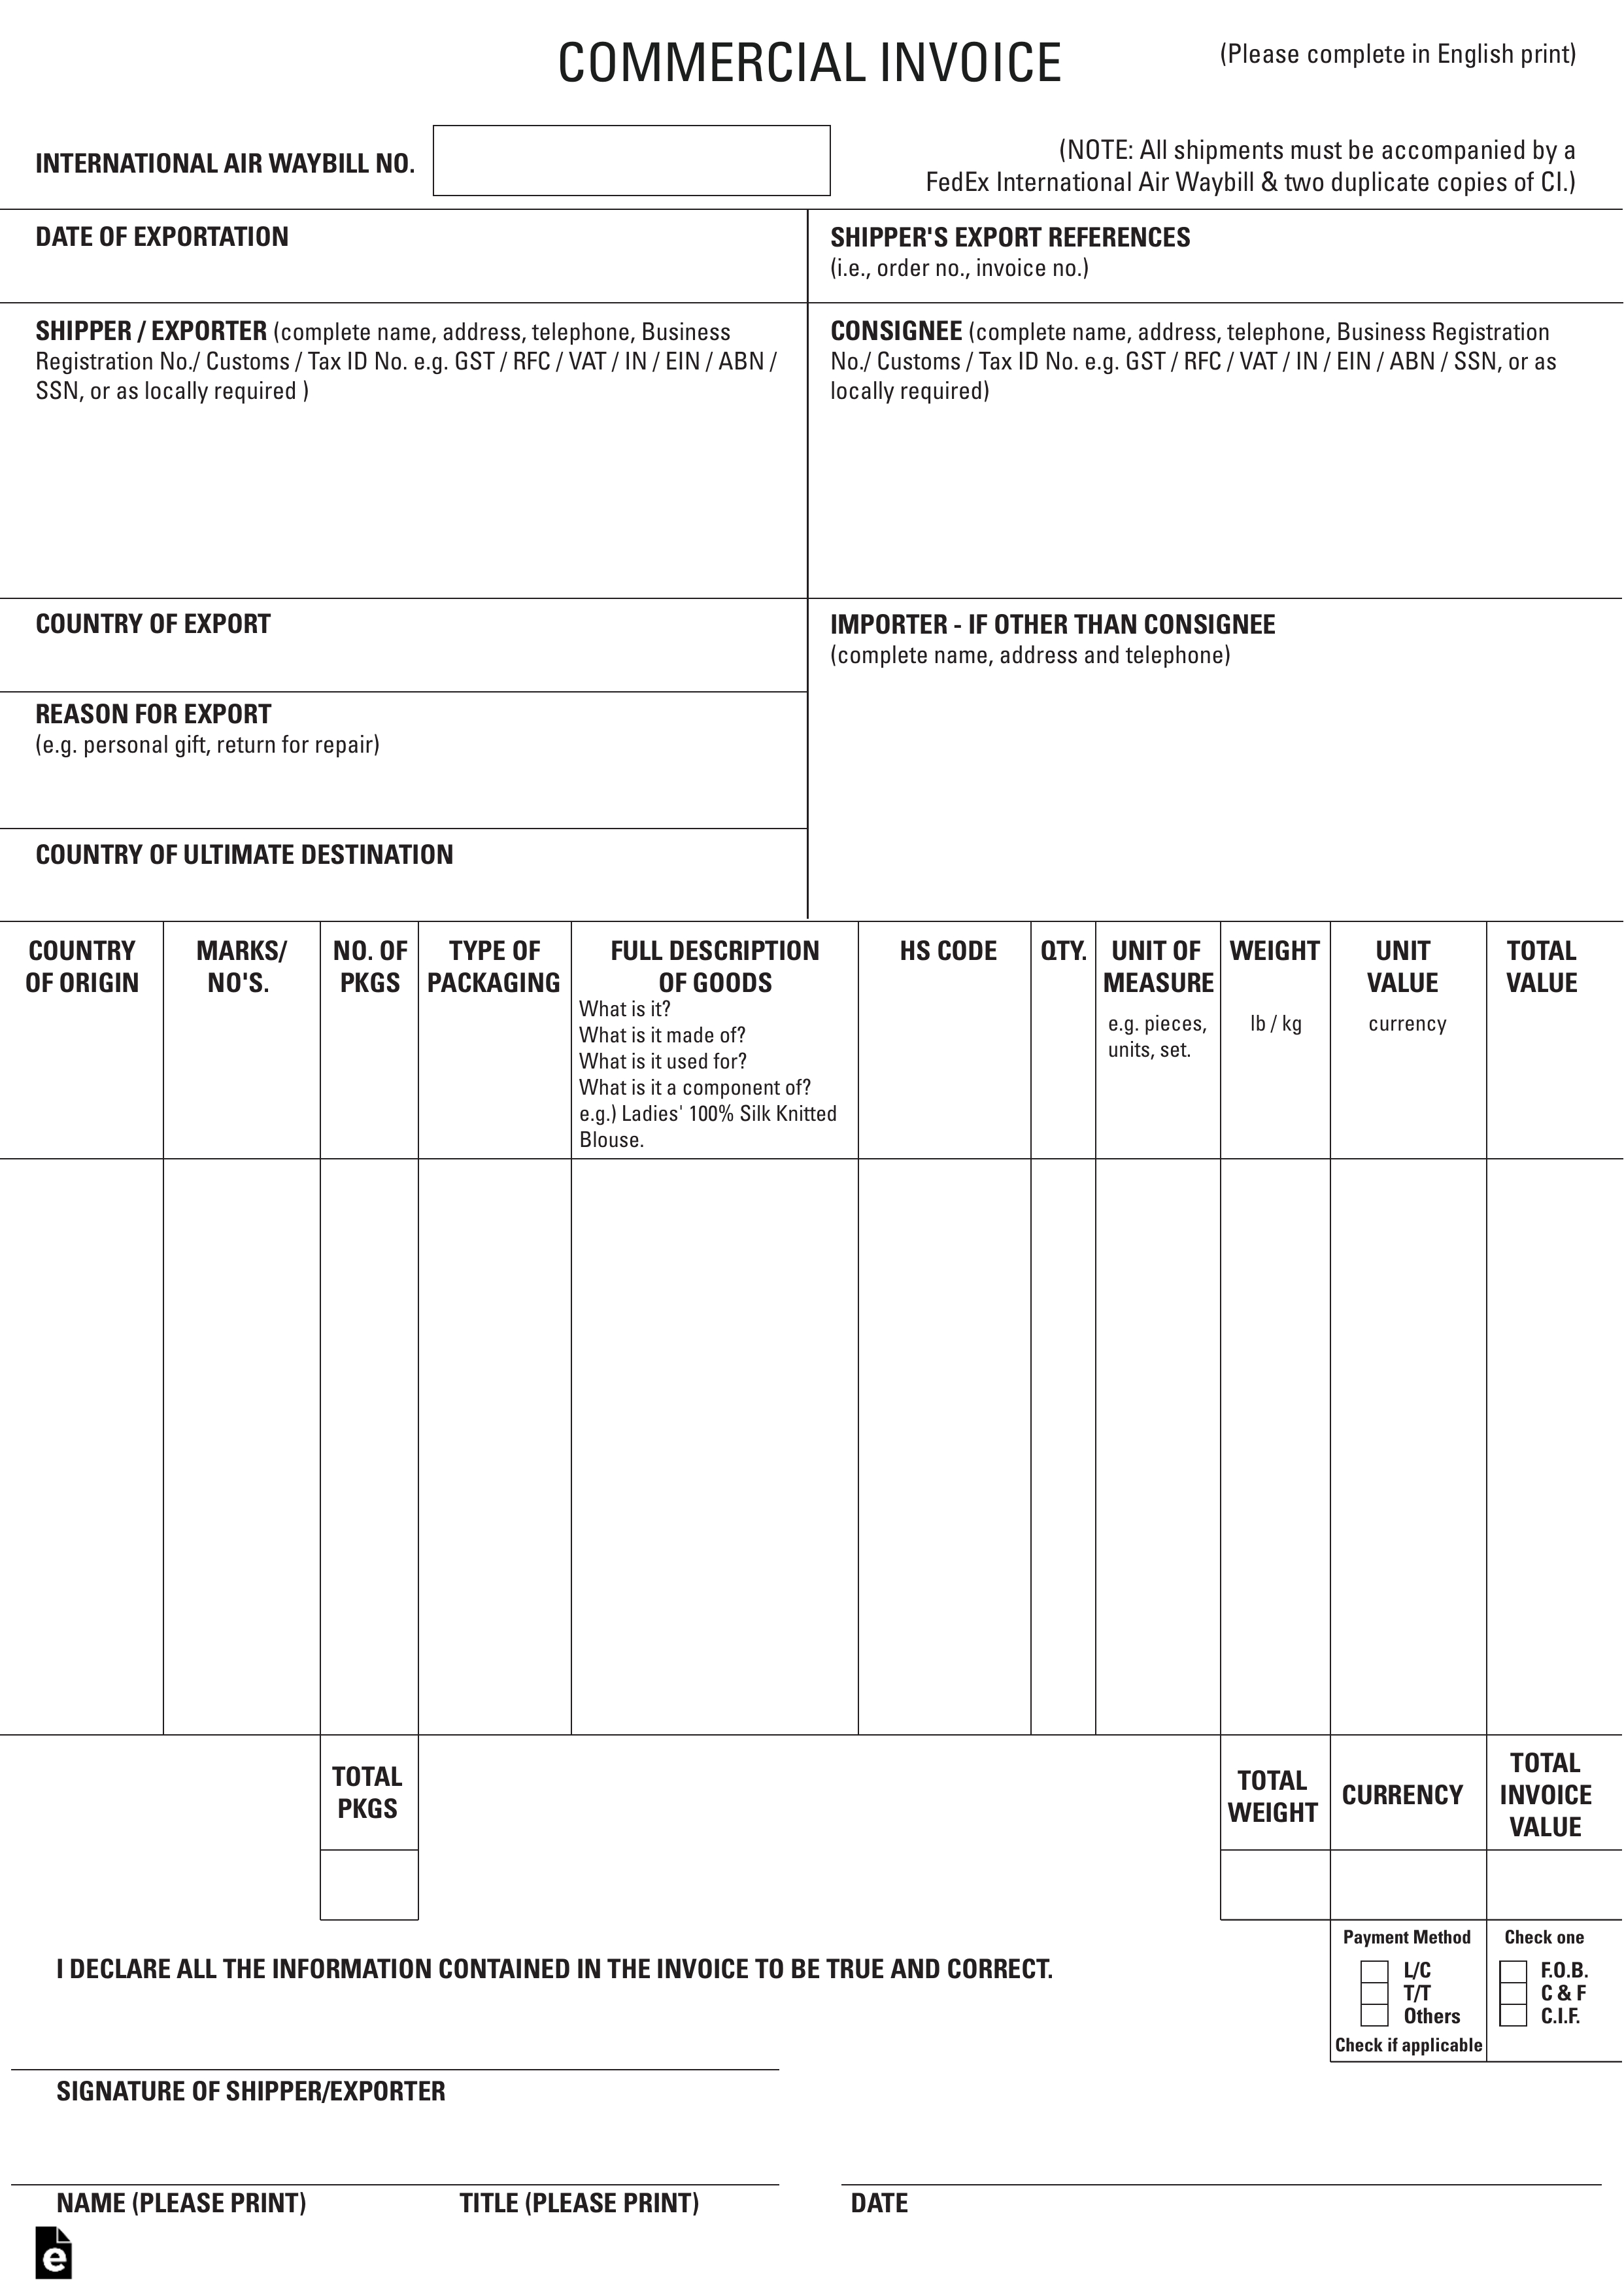 free international commercial invoice templates pdf ups international commercial invoice template